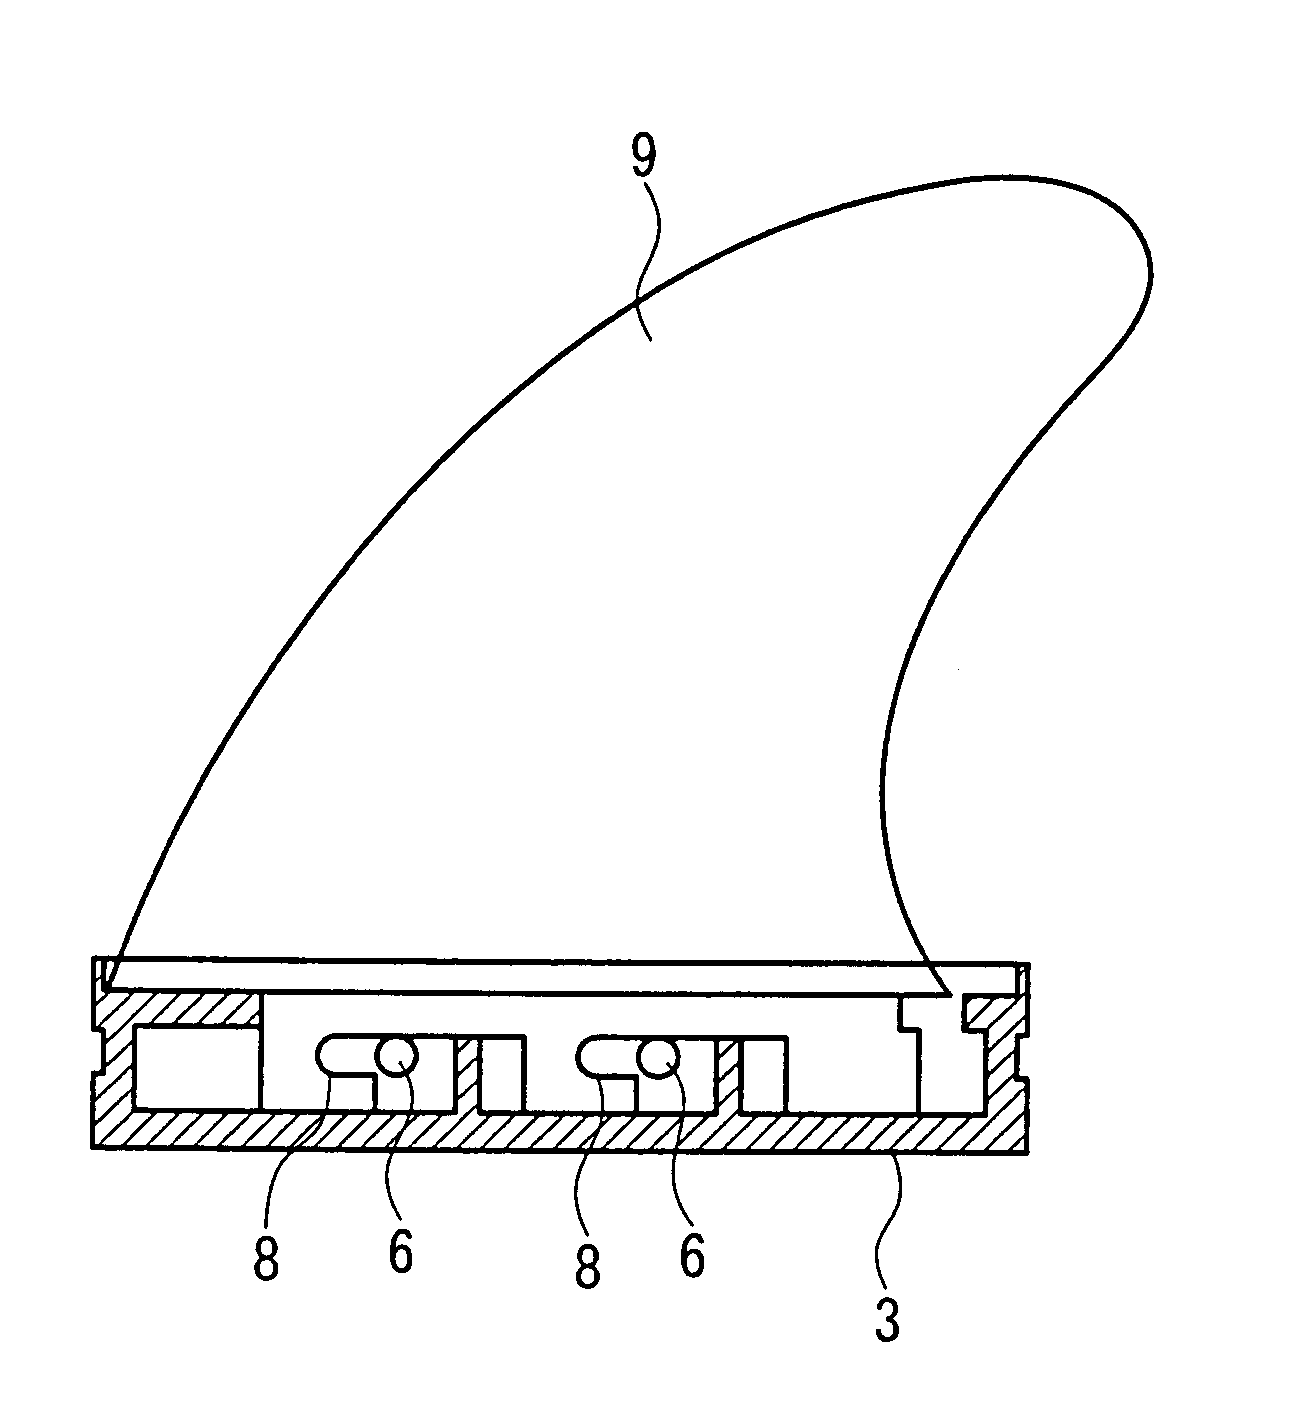 Method for fixing or removing surfboard fin